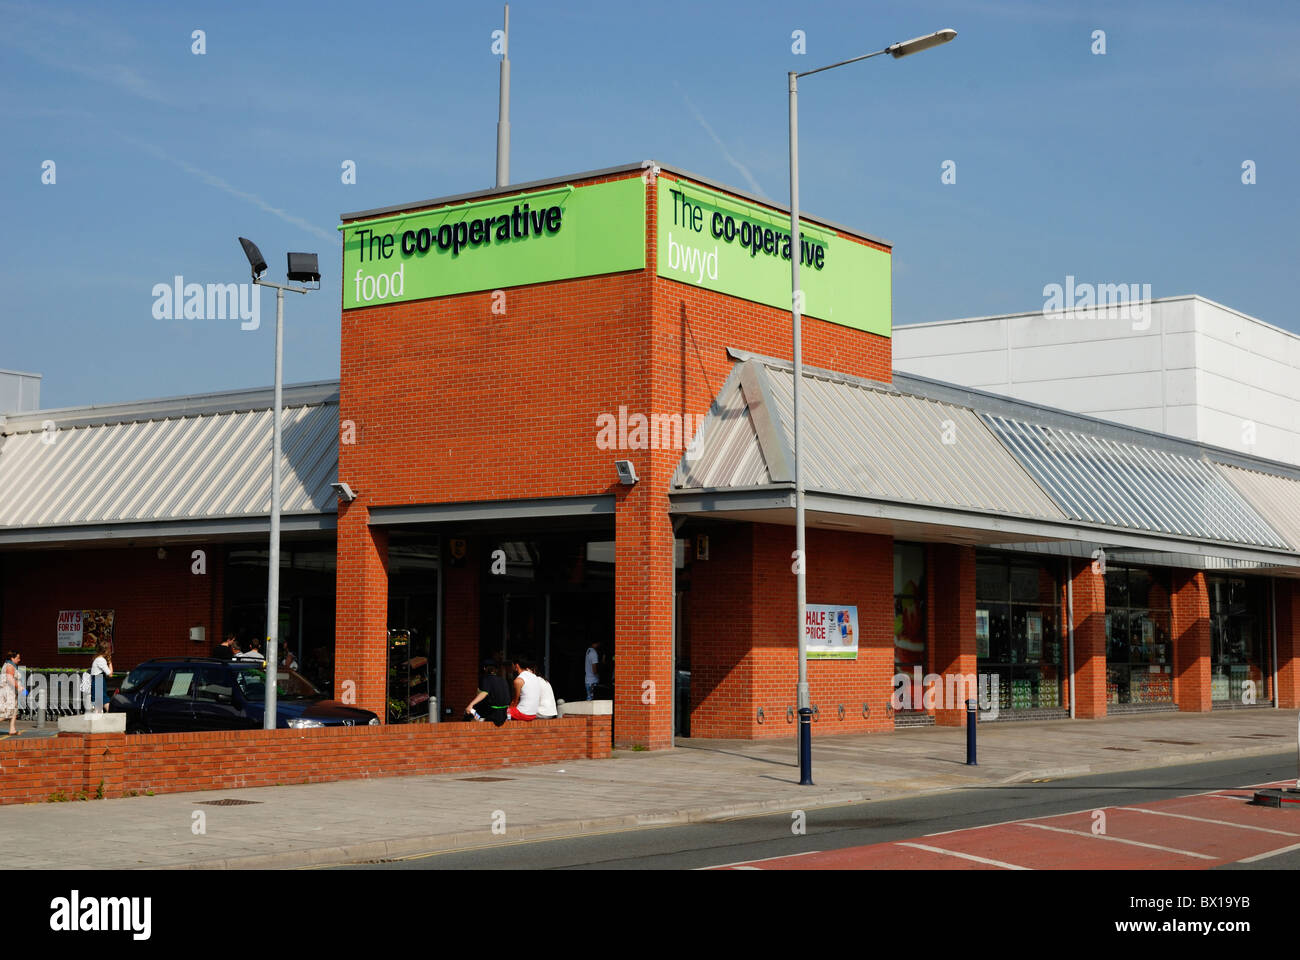 The Cooperative Food store, Ystwyth Retail Park, Aberystwyth, Wales Stock Photo